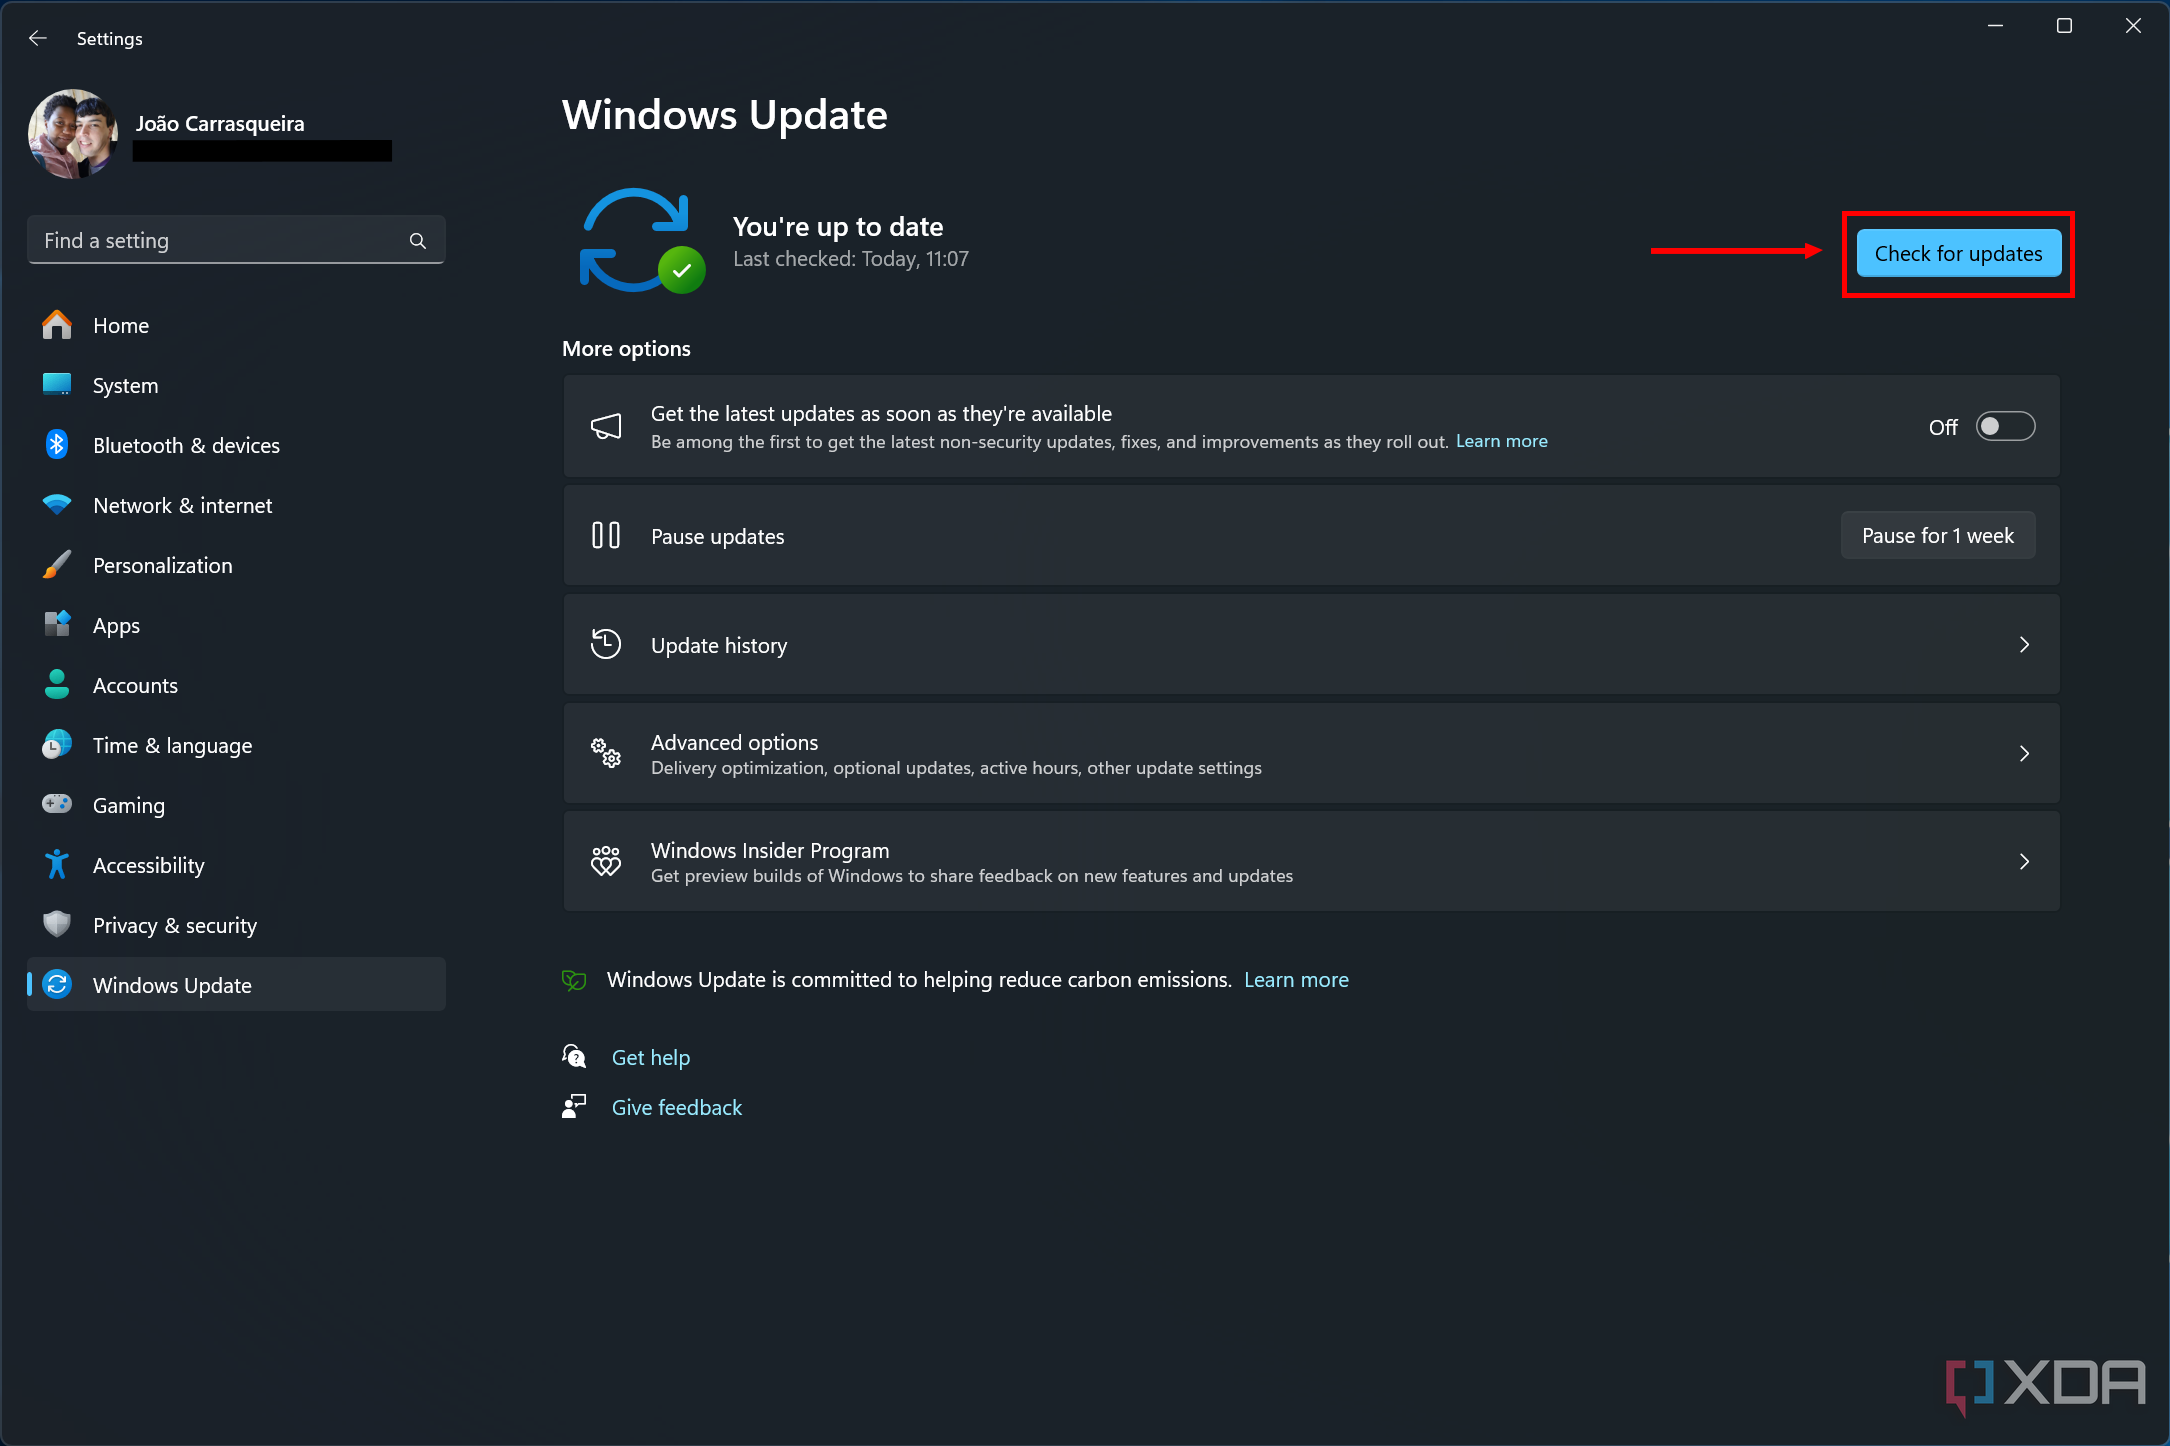 Screenshot of Windows Update with the Check for updates button highlighted